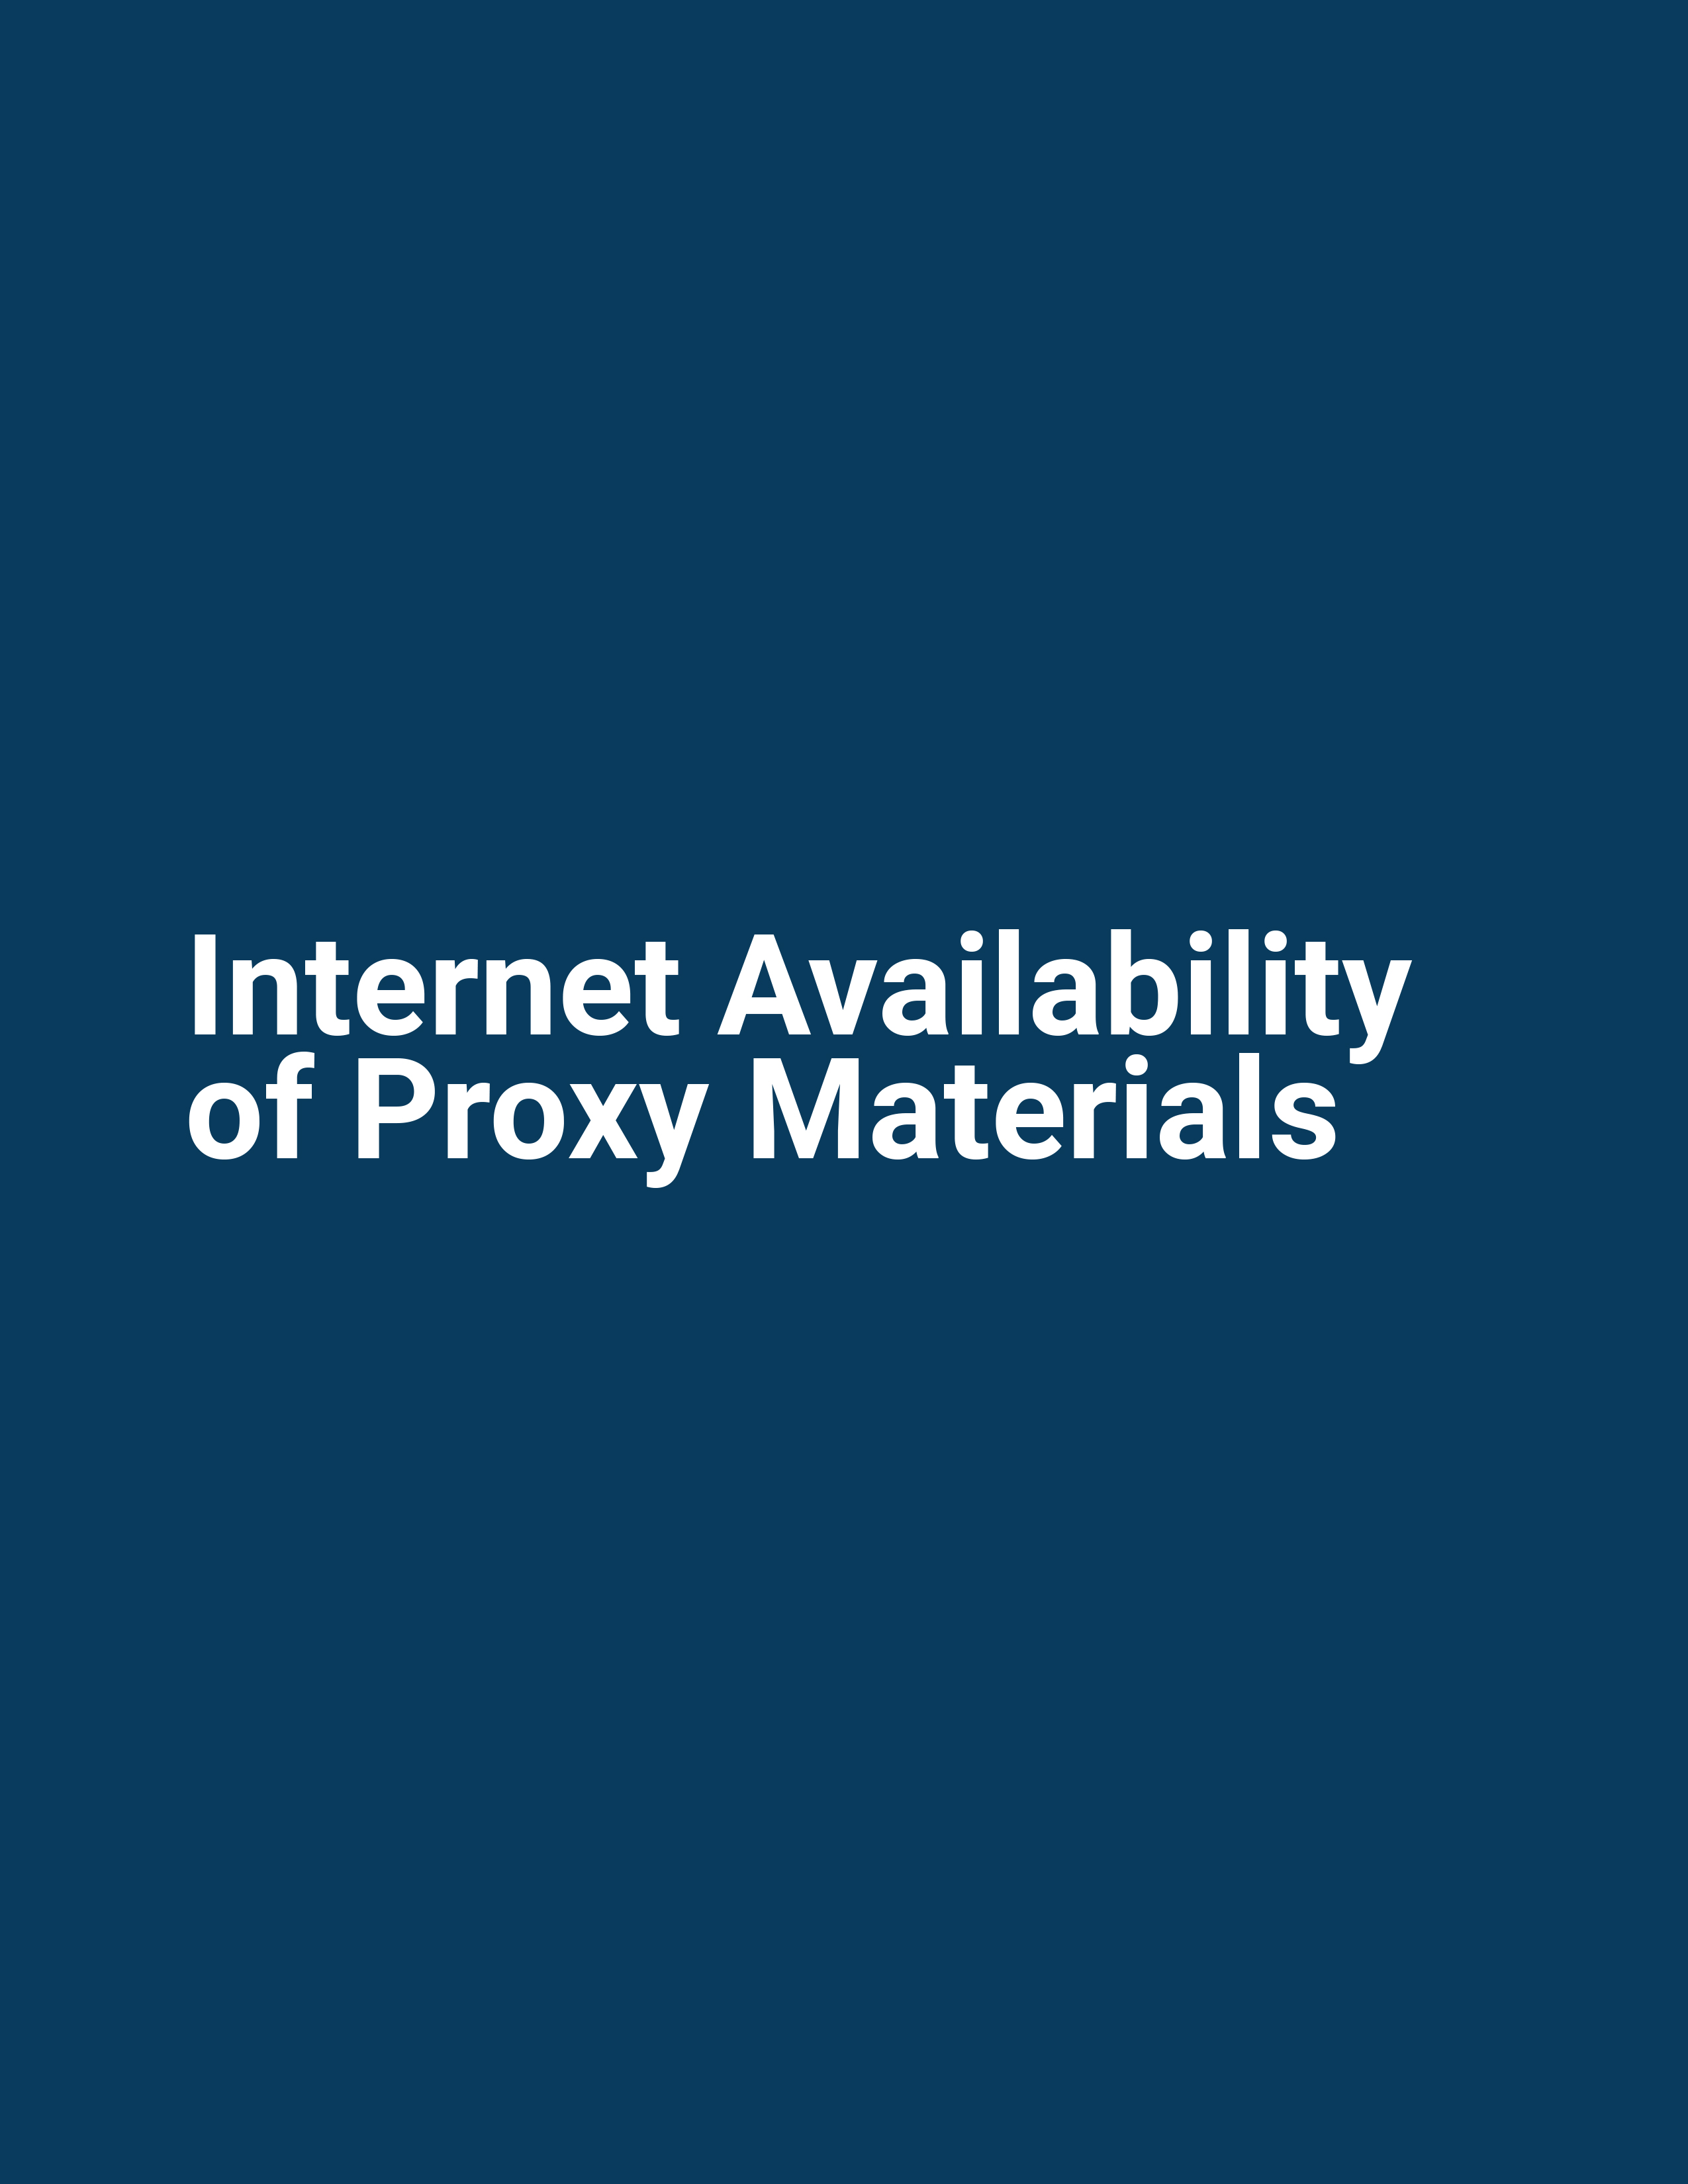 mirion_proxy_section_pages_041024-5.jpg